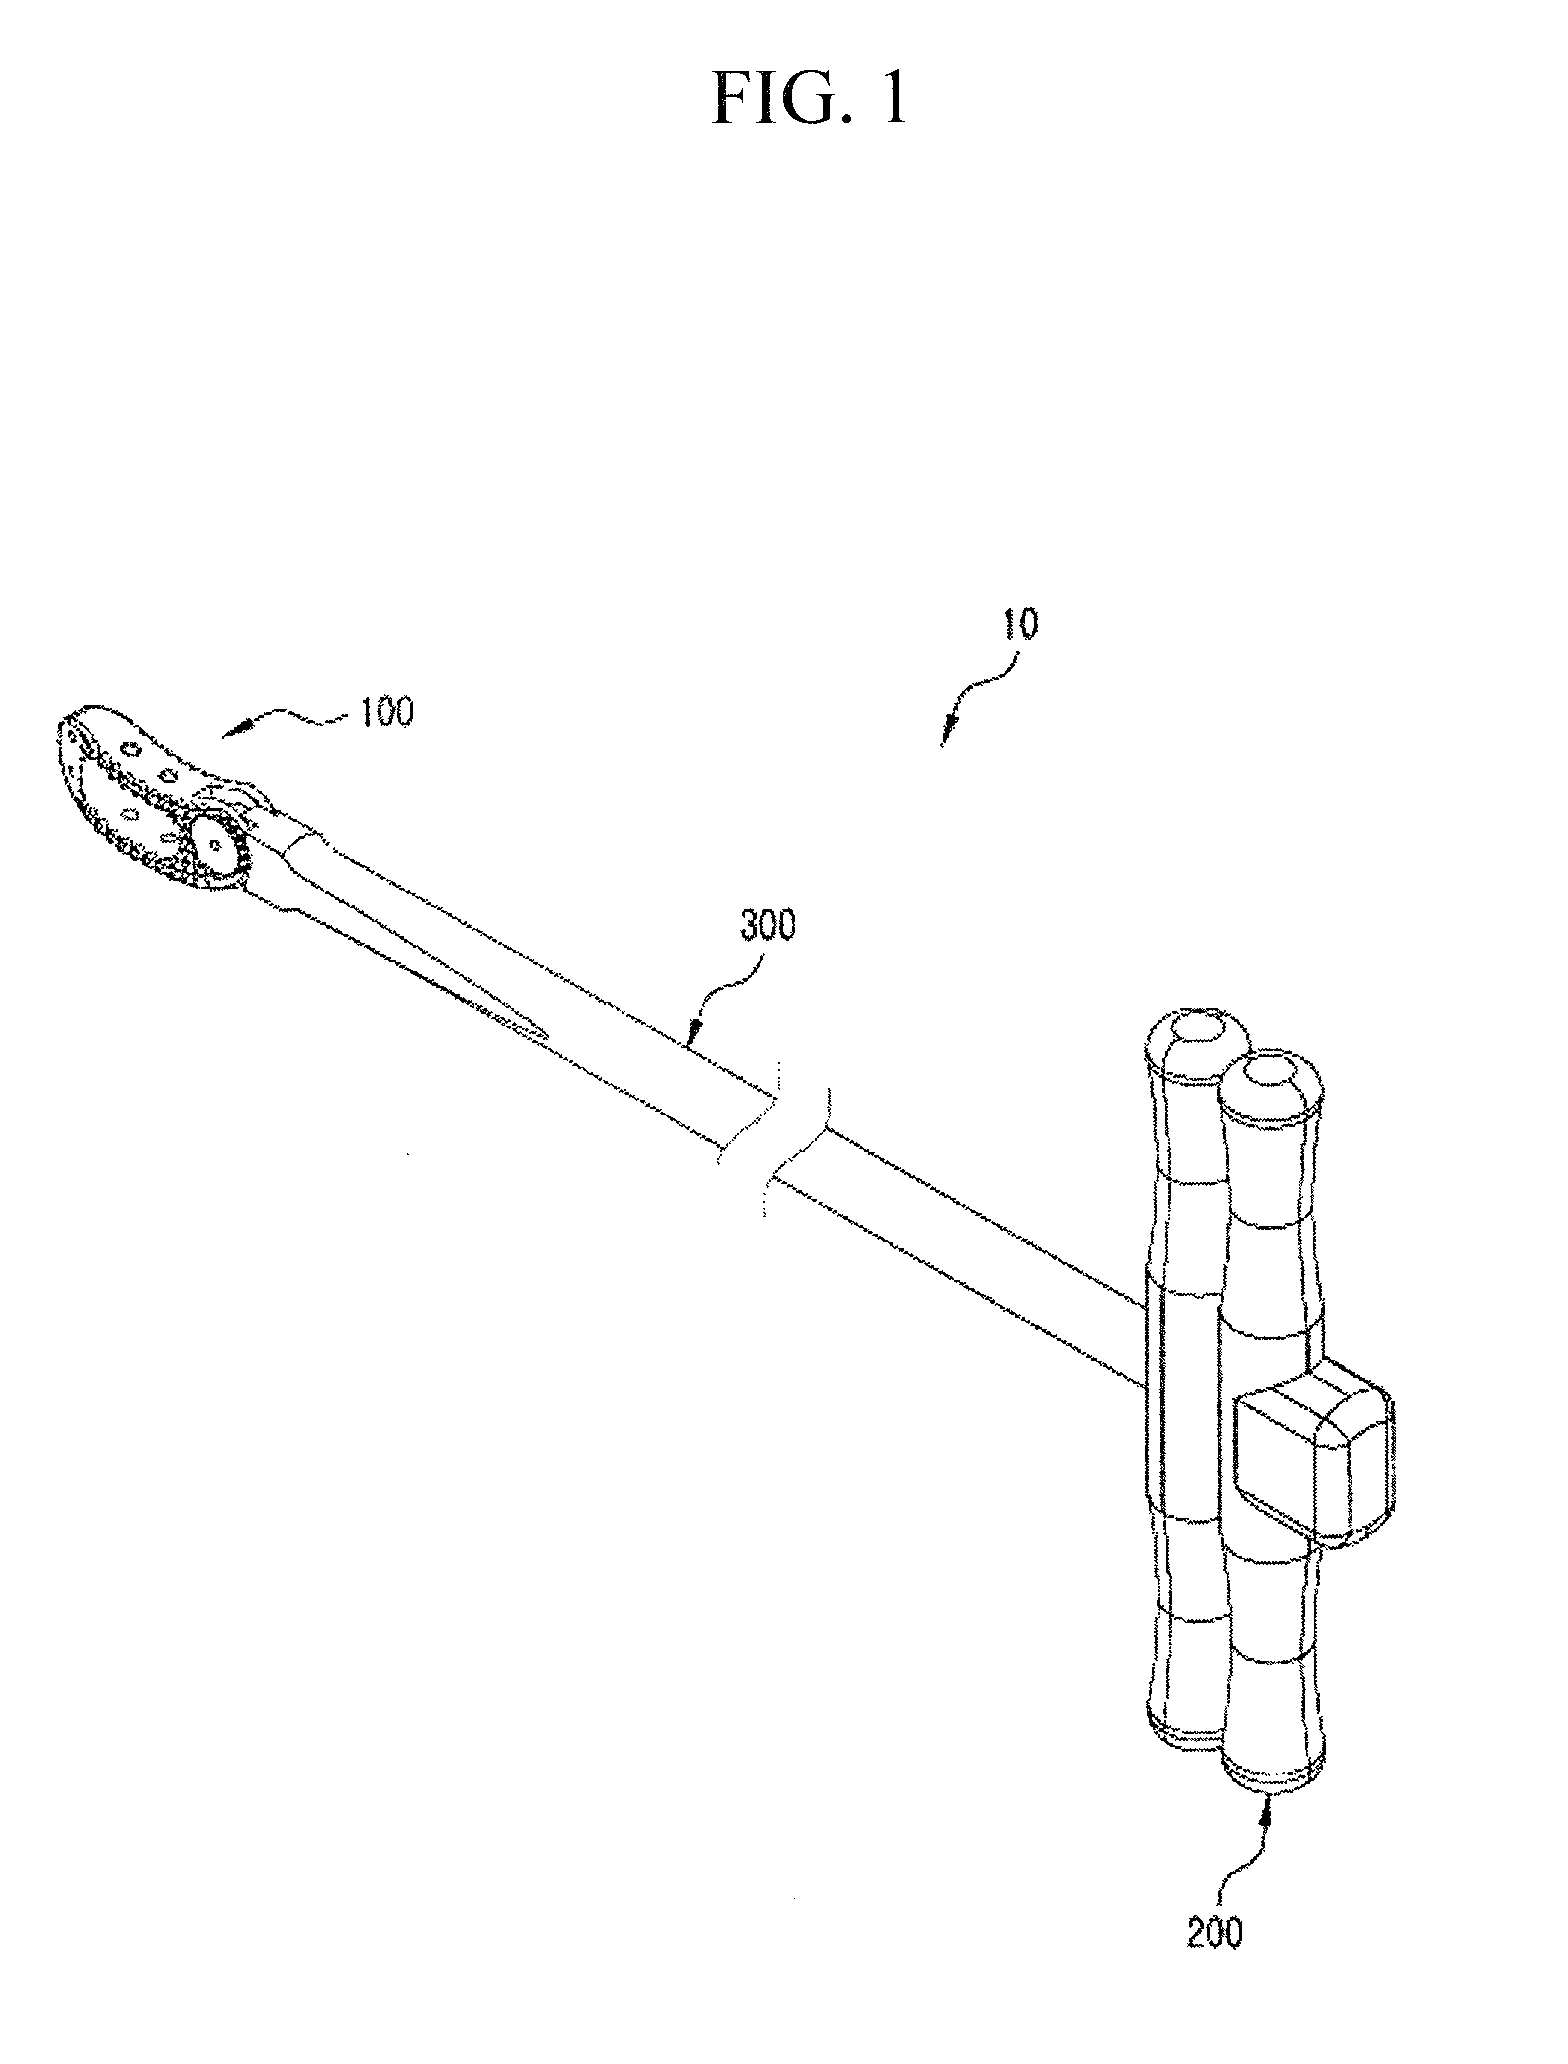 Artificial disk for transforaminal lumbar interbody fusion (TLIF) and insertion assembly thereof